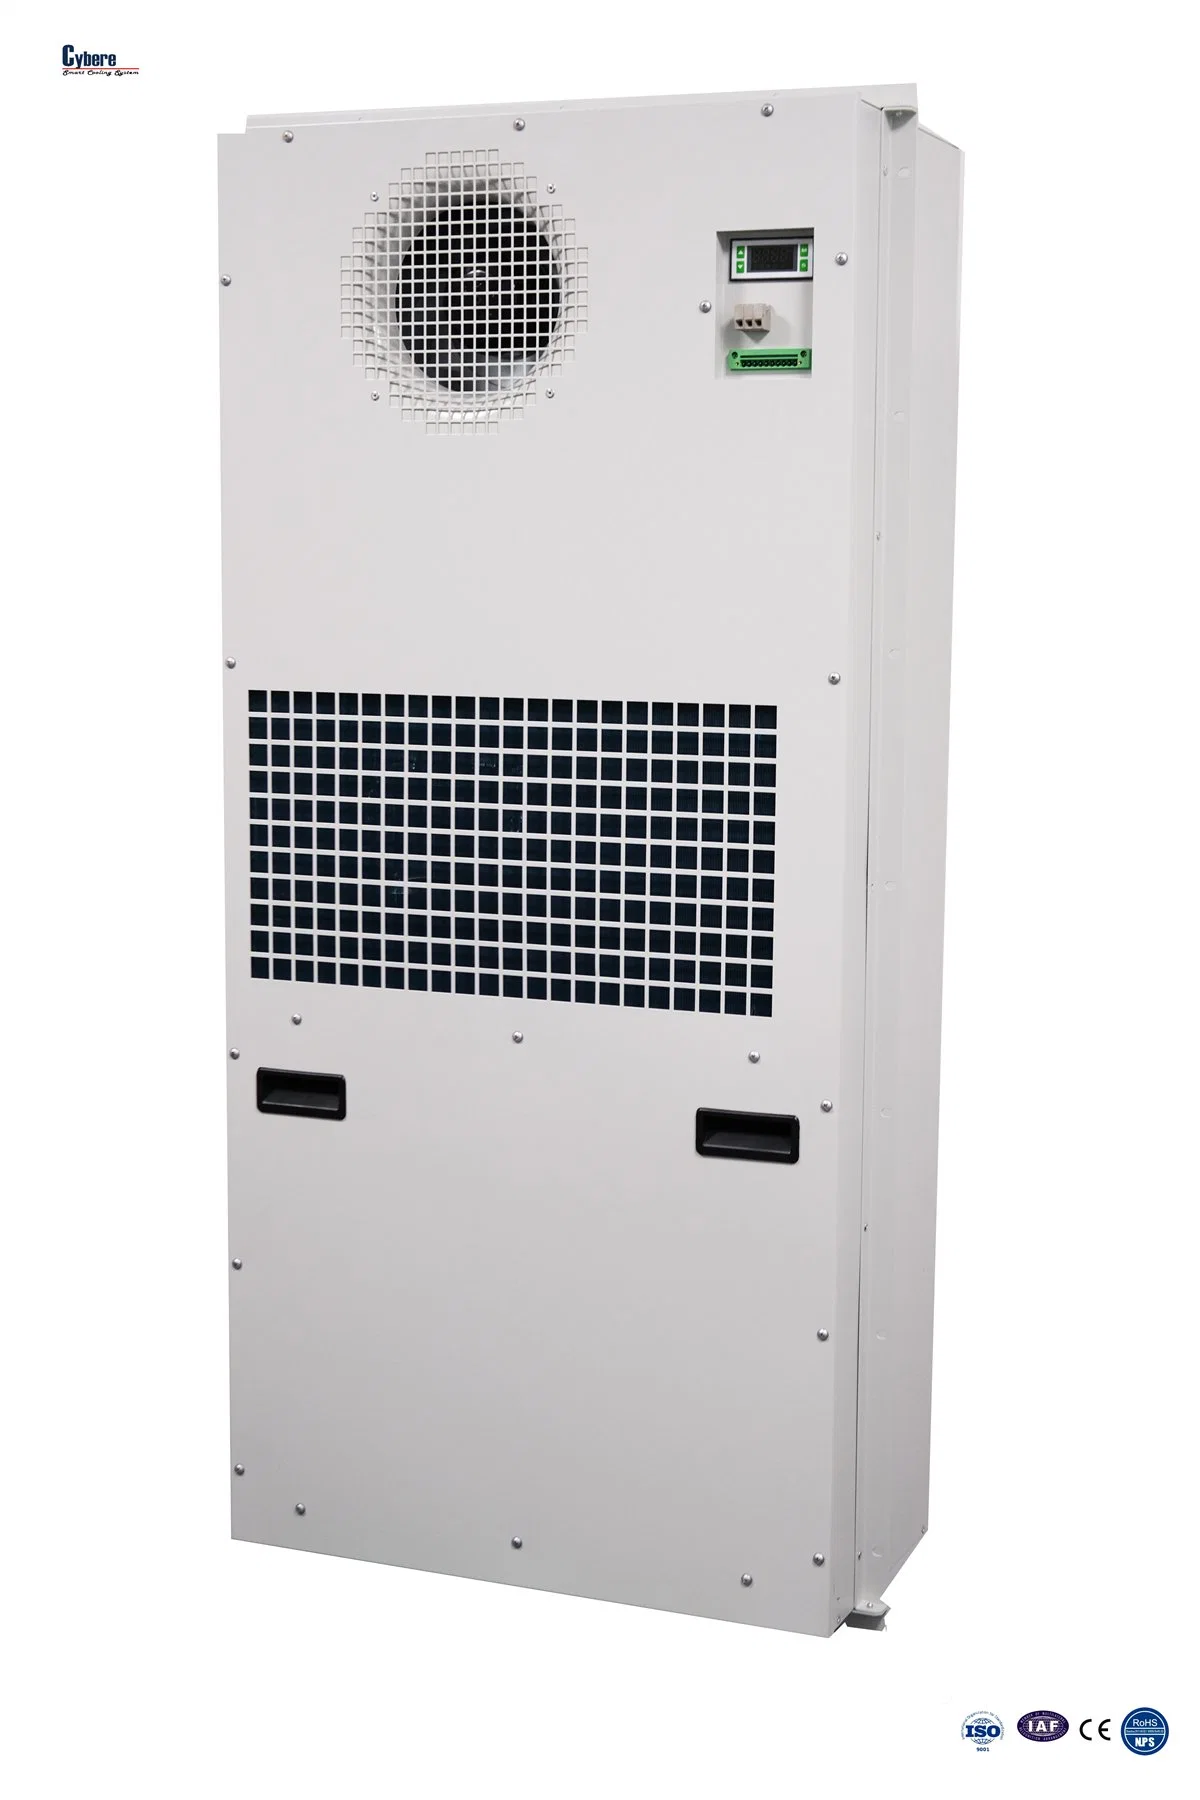 DC 4000W Industrial Active Cooling Panel Air Conditioner for Telecom Cabinet